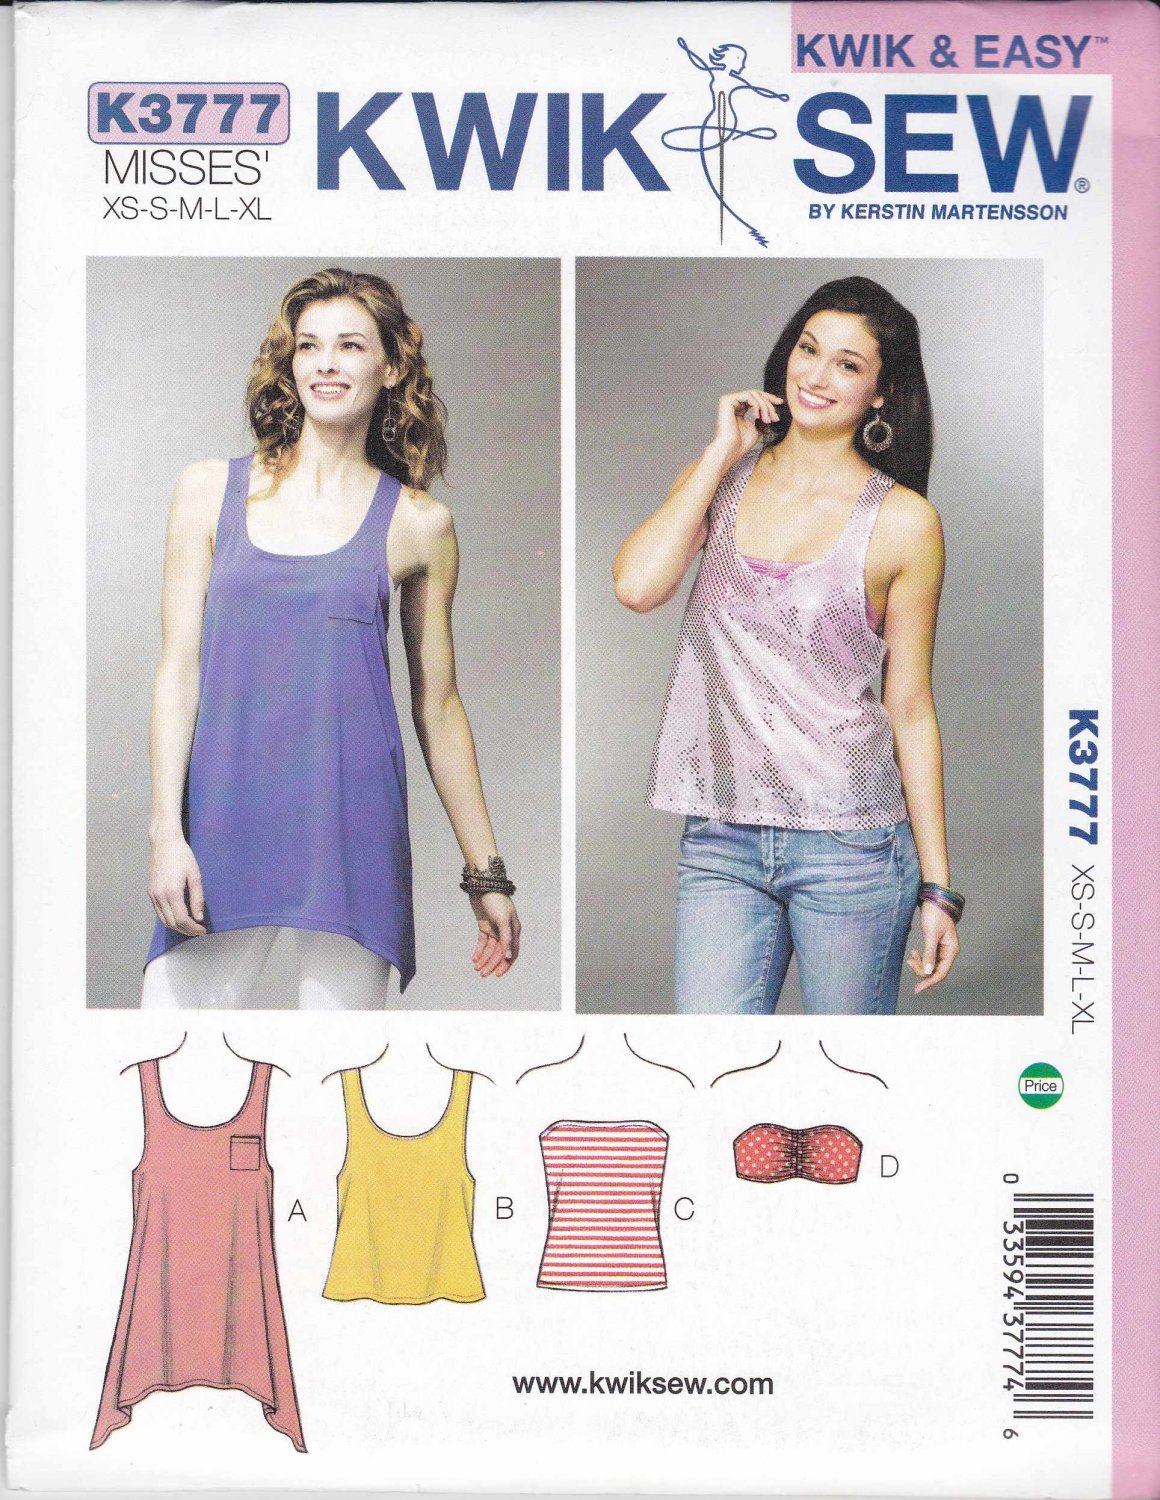 Kwik Sew Sewing Pattern 3777 Misses Sizes XS-XL (approx 6-22) Pullover ...